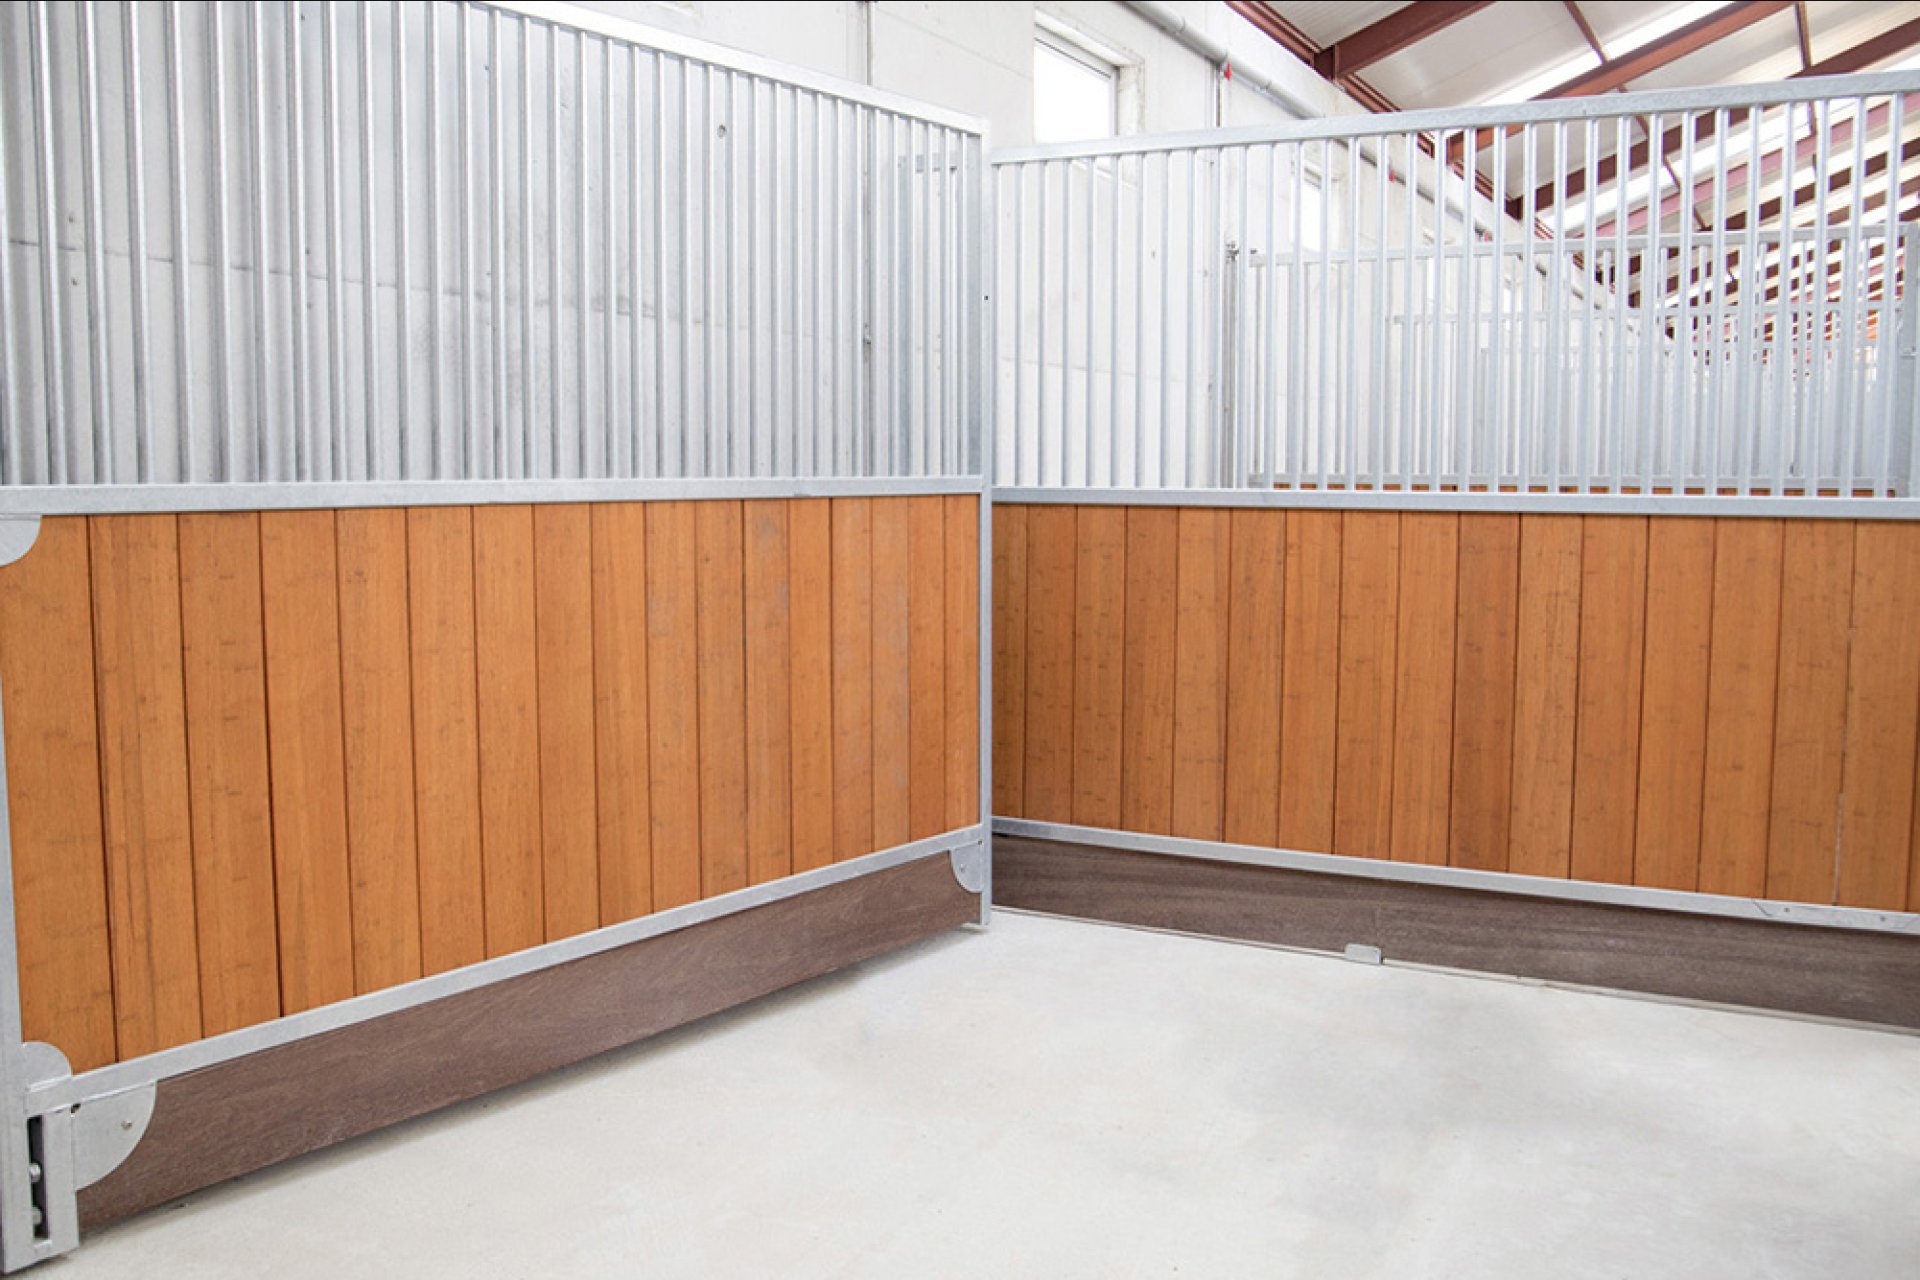 Image horse stall stable partitions (M000086889)